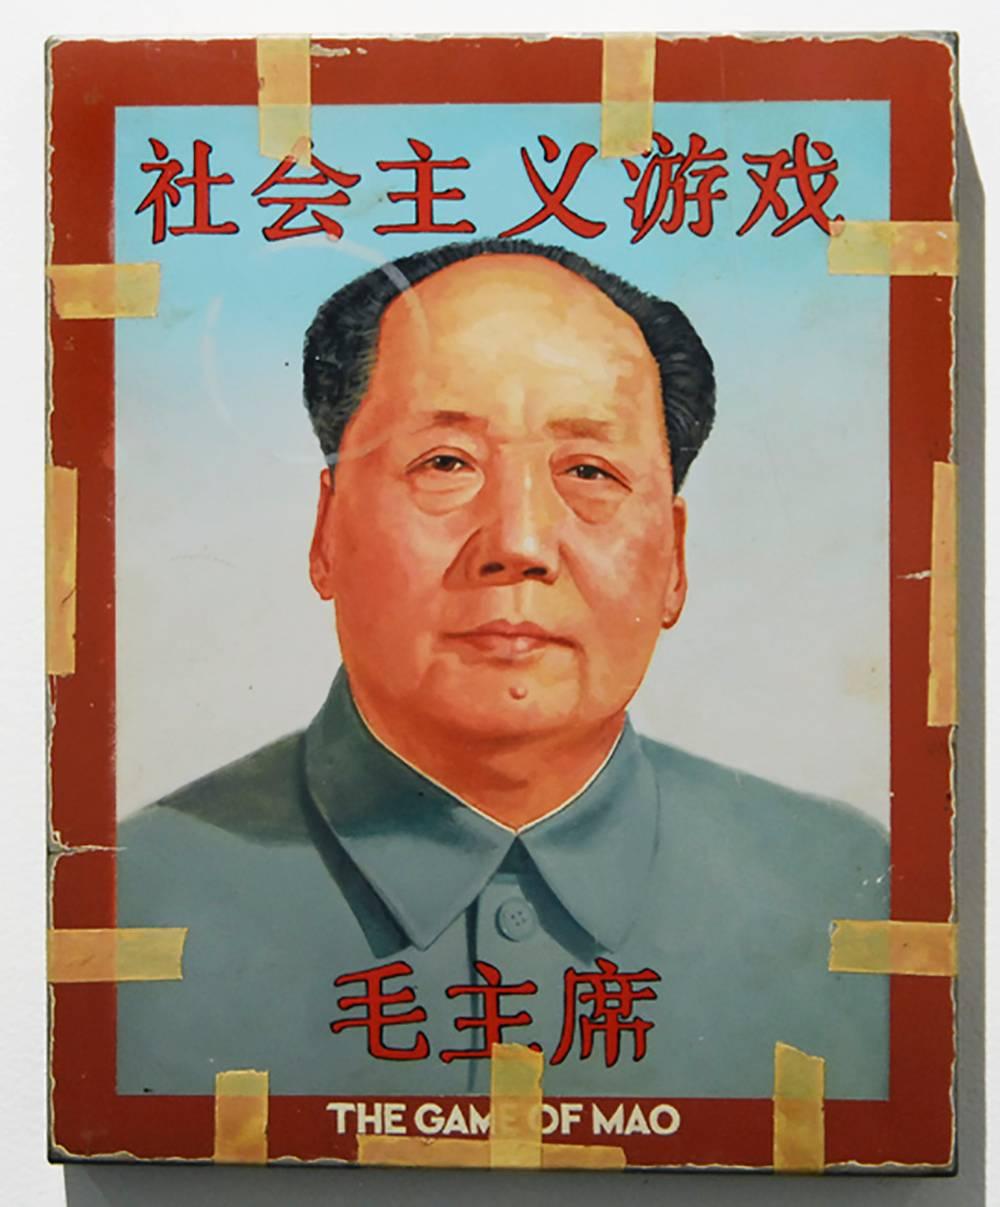 The Game of Mao - Mixed Media Art by Tim Liddy